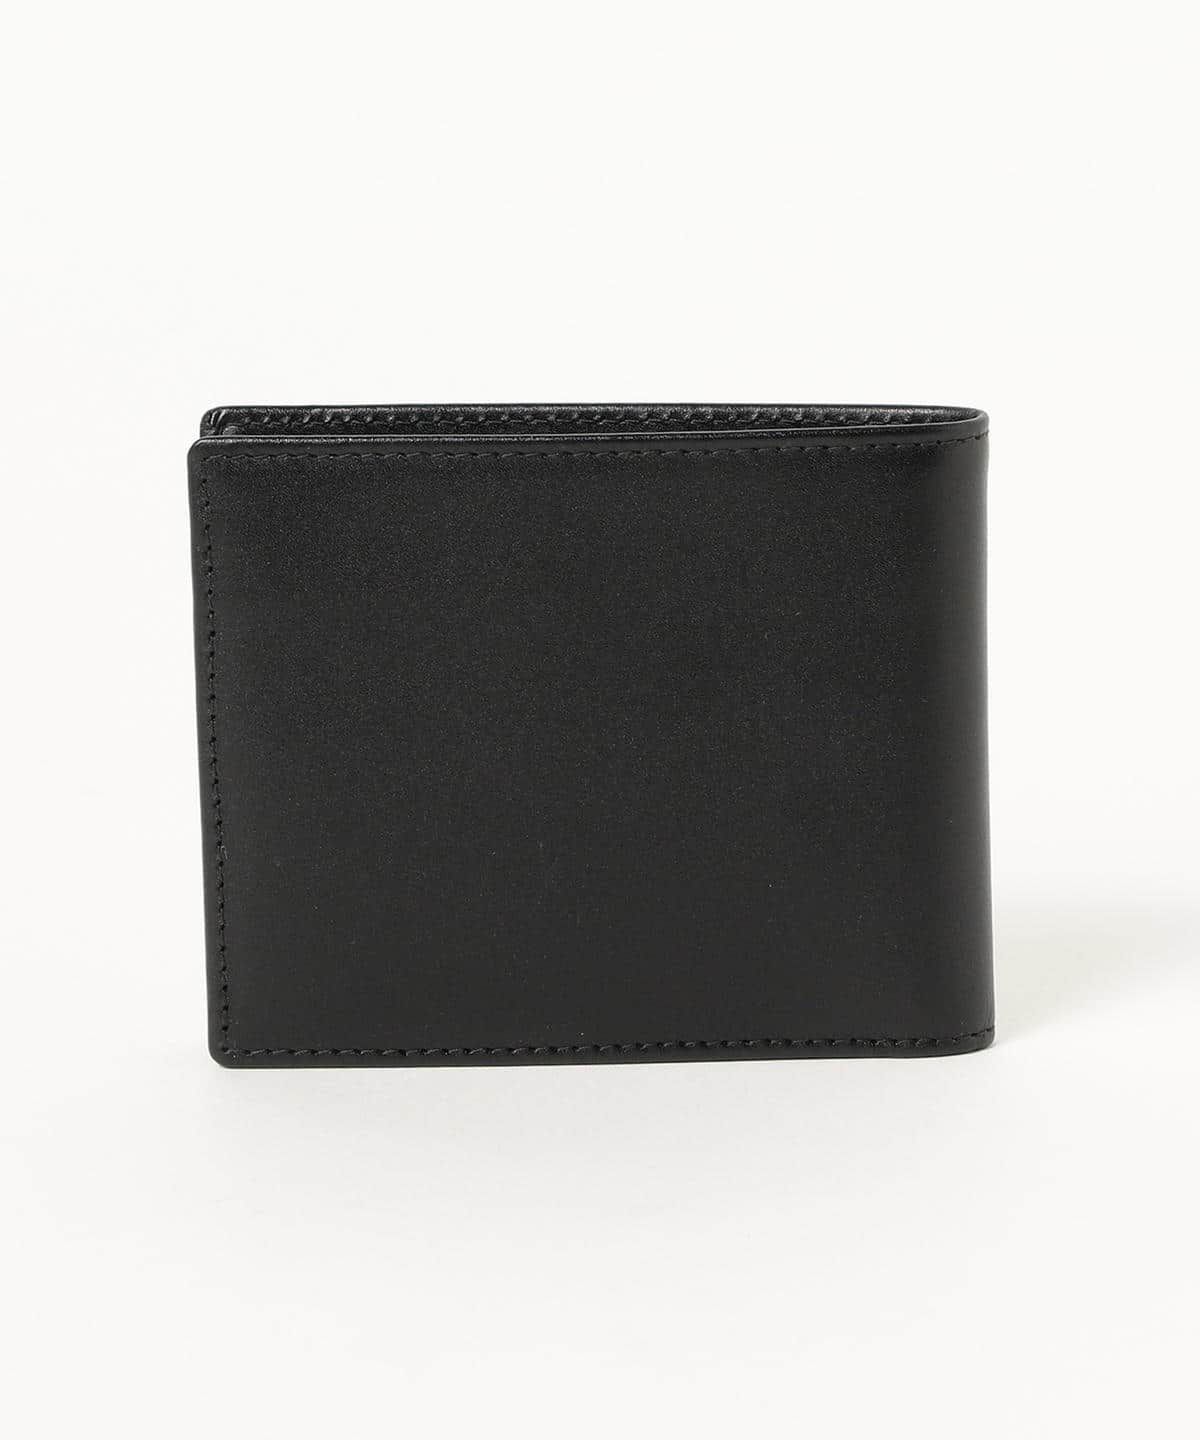 BEAMS BEAMS F ETTINGER / Sterling Collection Leather Bifold Wallet